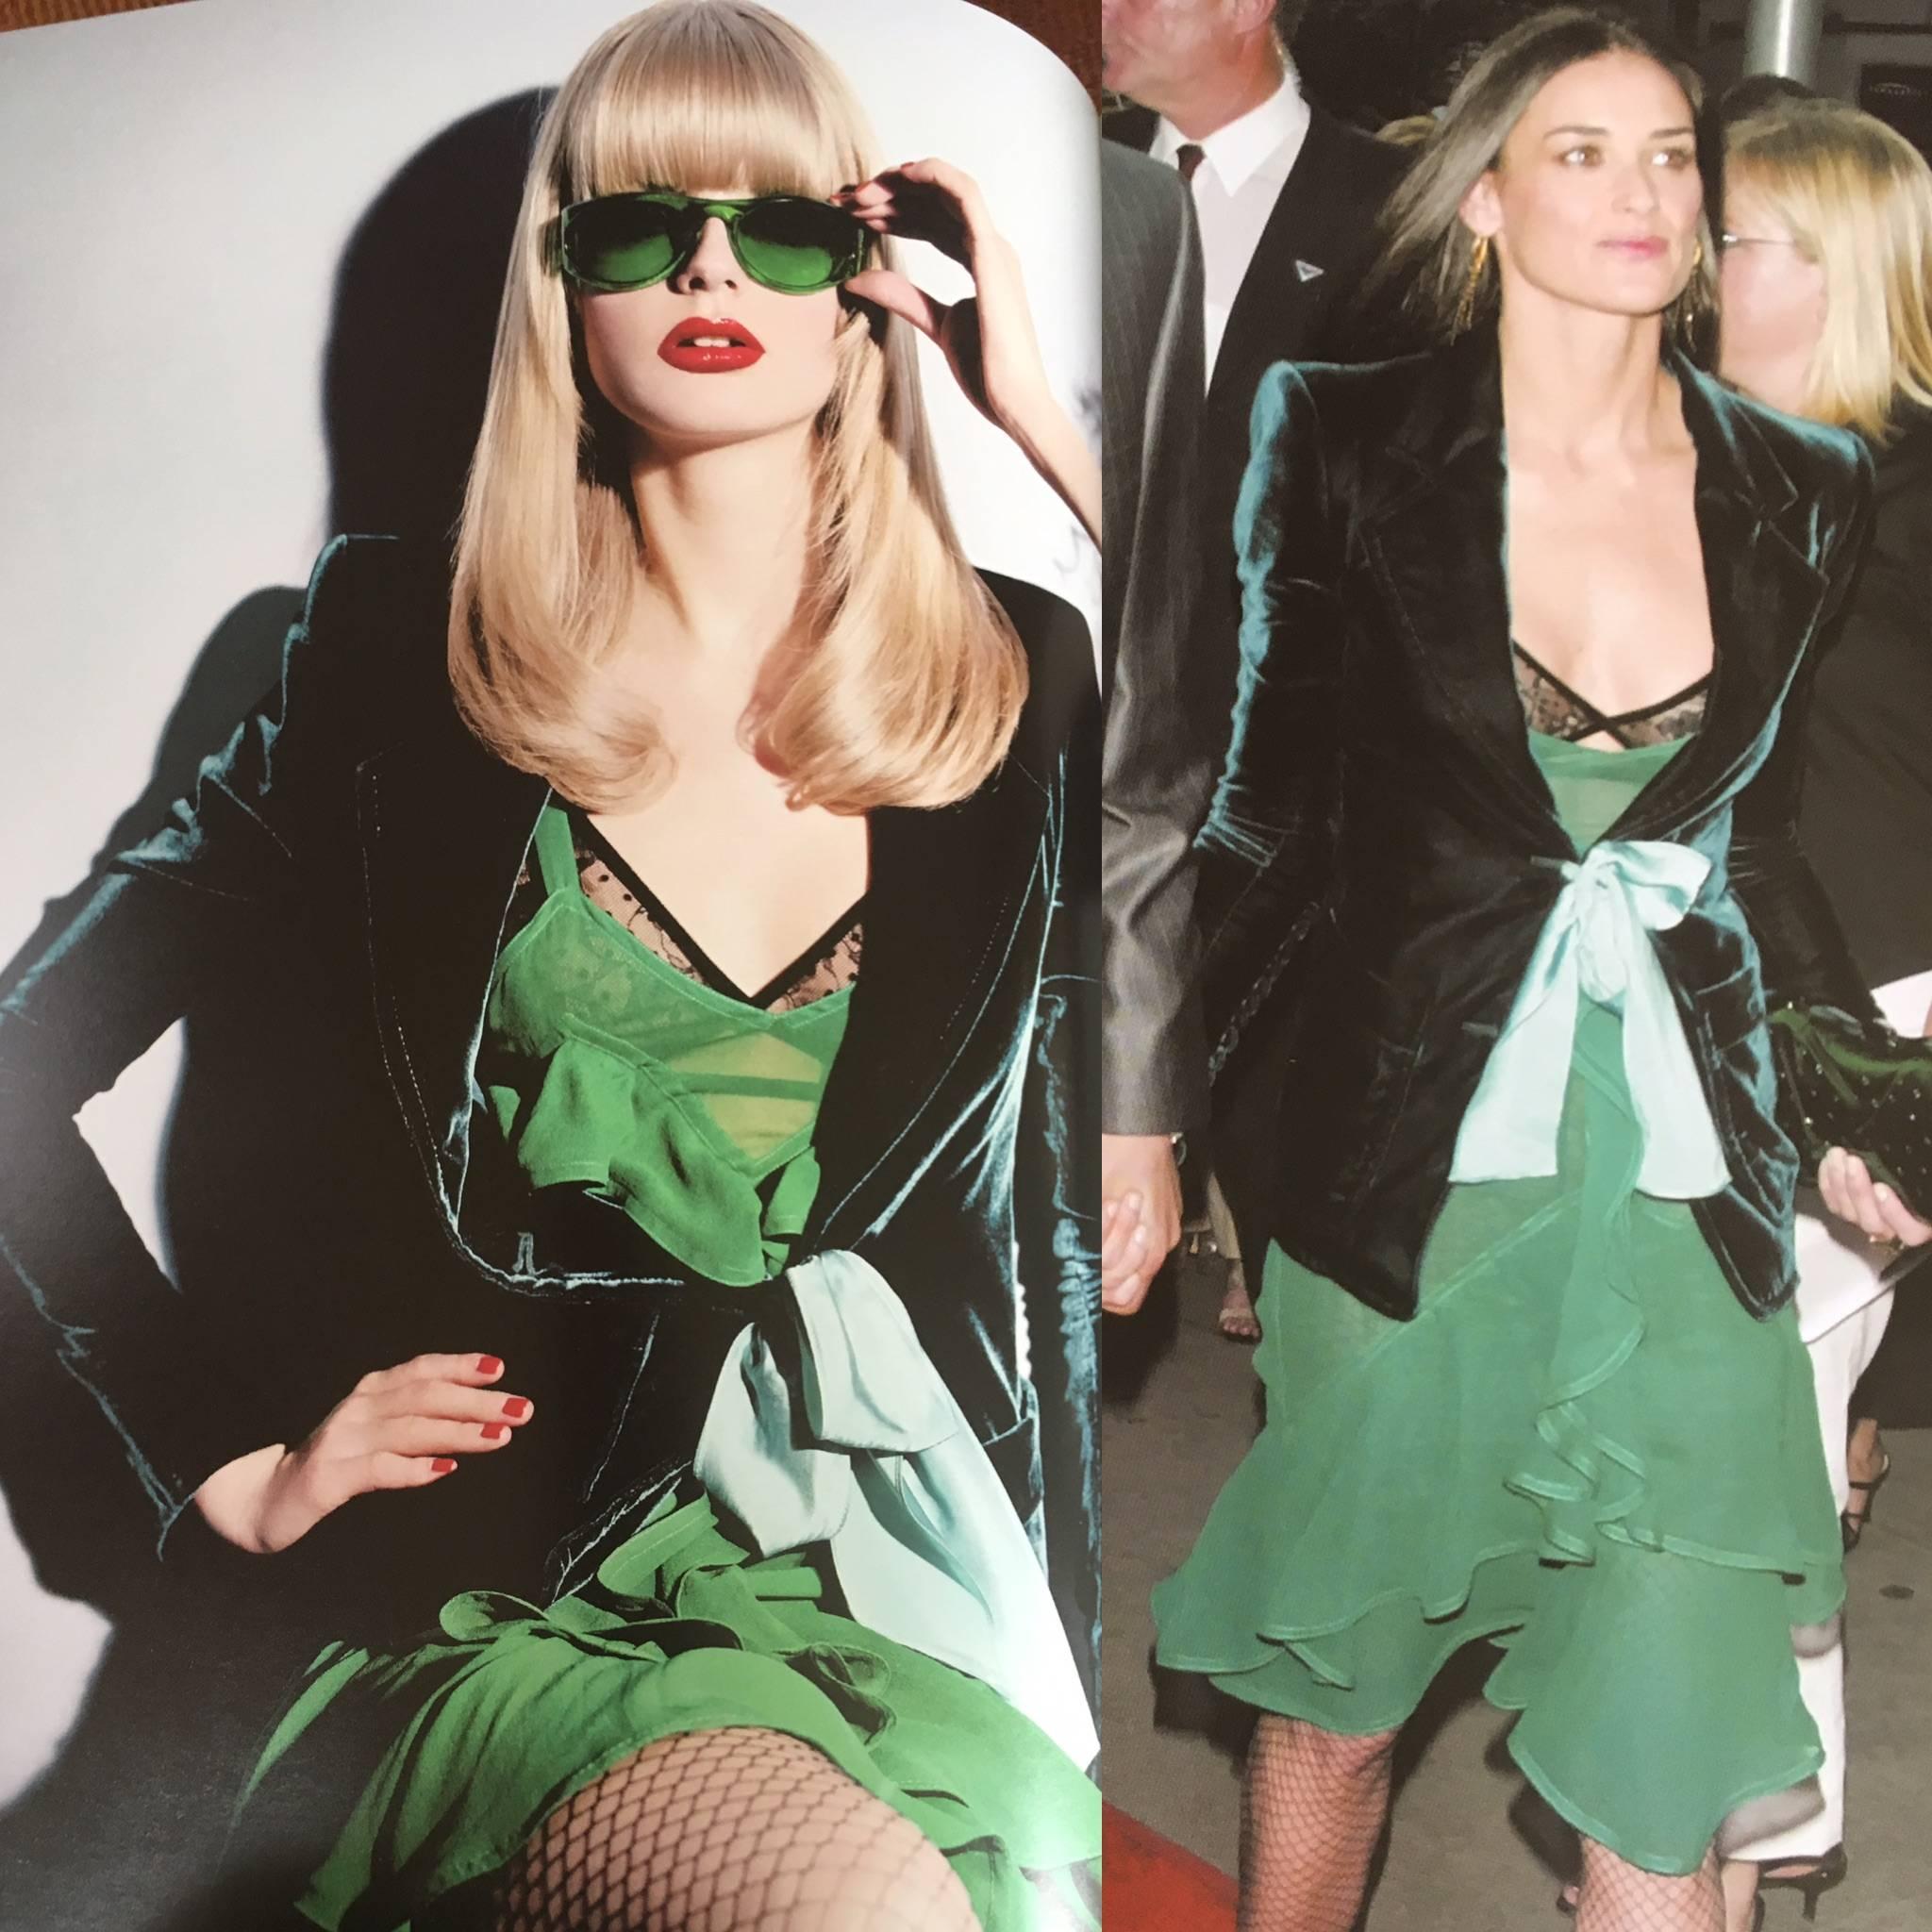 Yves Saint Laurent by Tom Ford Fall 2003 Green Ruffle Dress and Matching Teal Velvet Jacket
Look 1 from Fall 2003
There is a lot of stretch in the dress fabric.
sz M
Bust 34”
Waist 26”
Hip 30”
Length 45”
Jacket Size 
40 (M)
Bust 38"
Excellent